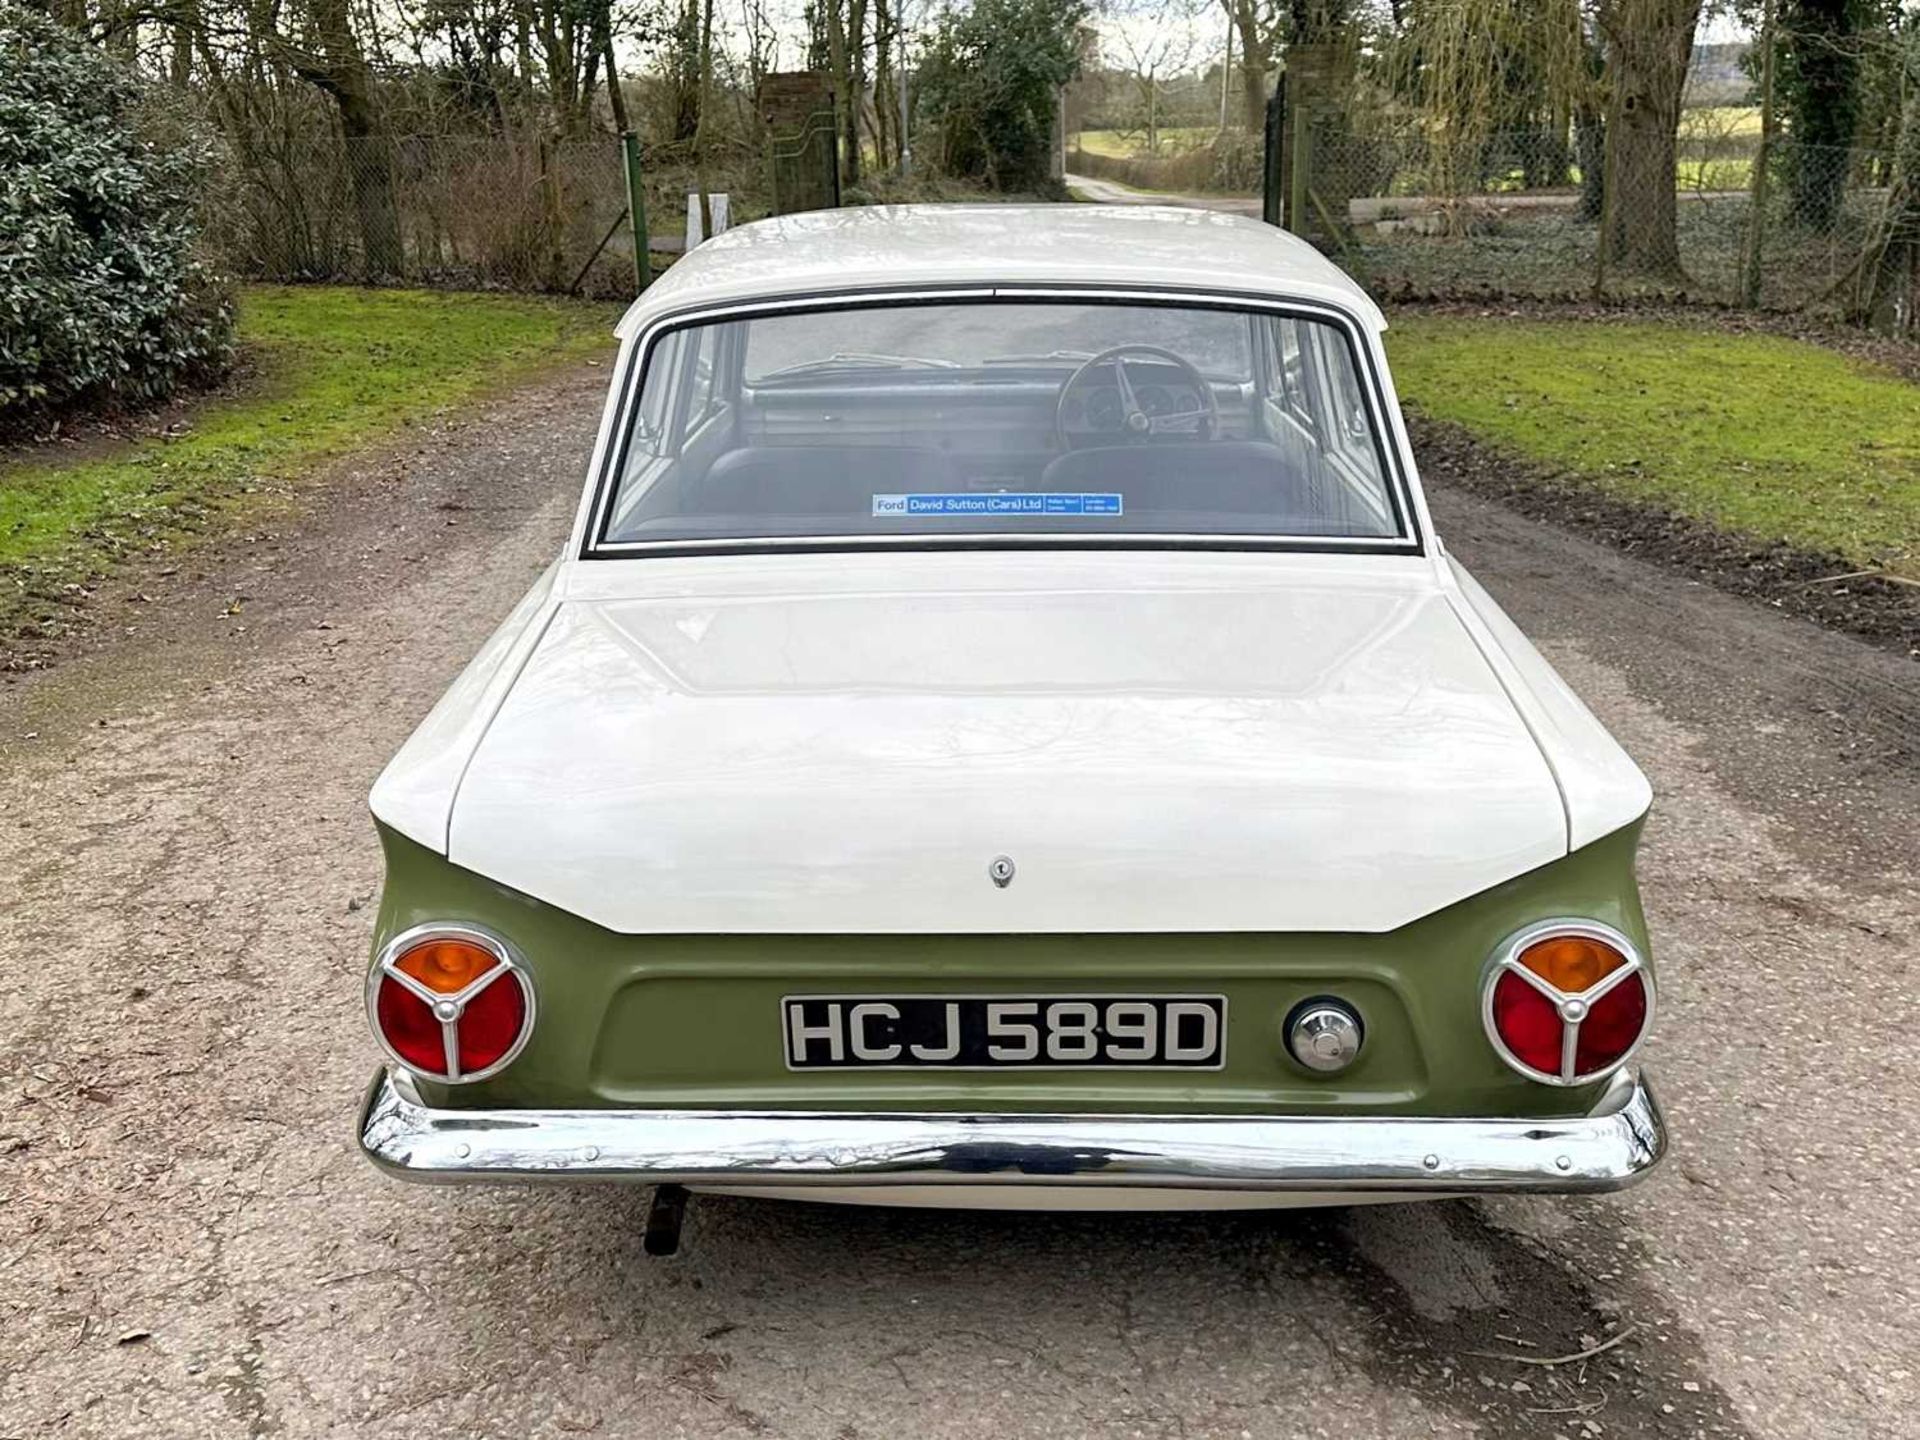 1963 Ford Lotus Cortina Pre-Aeroflow model, fitted with A-frame rear suspension - Image 17 of 58